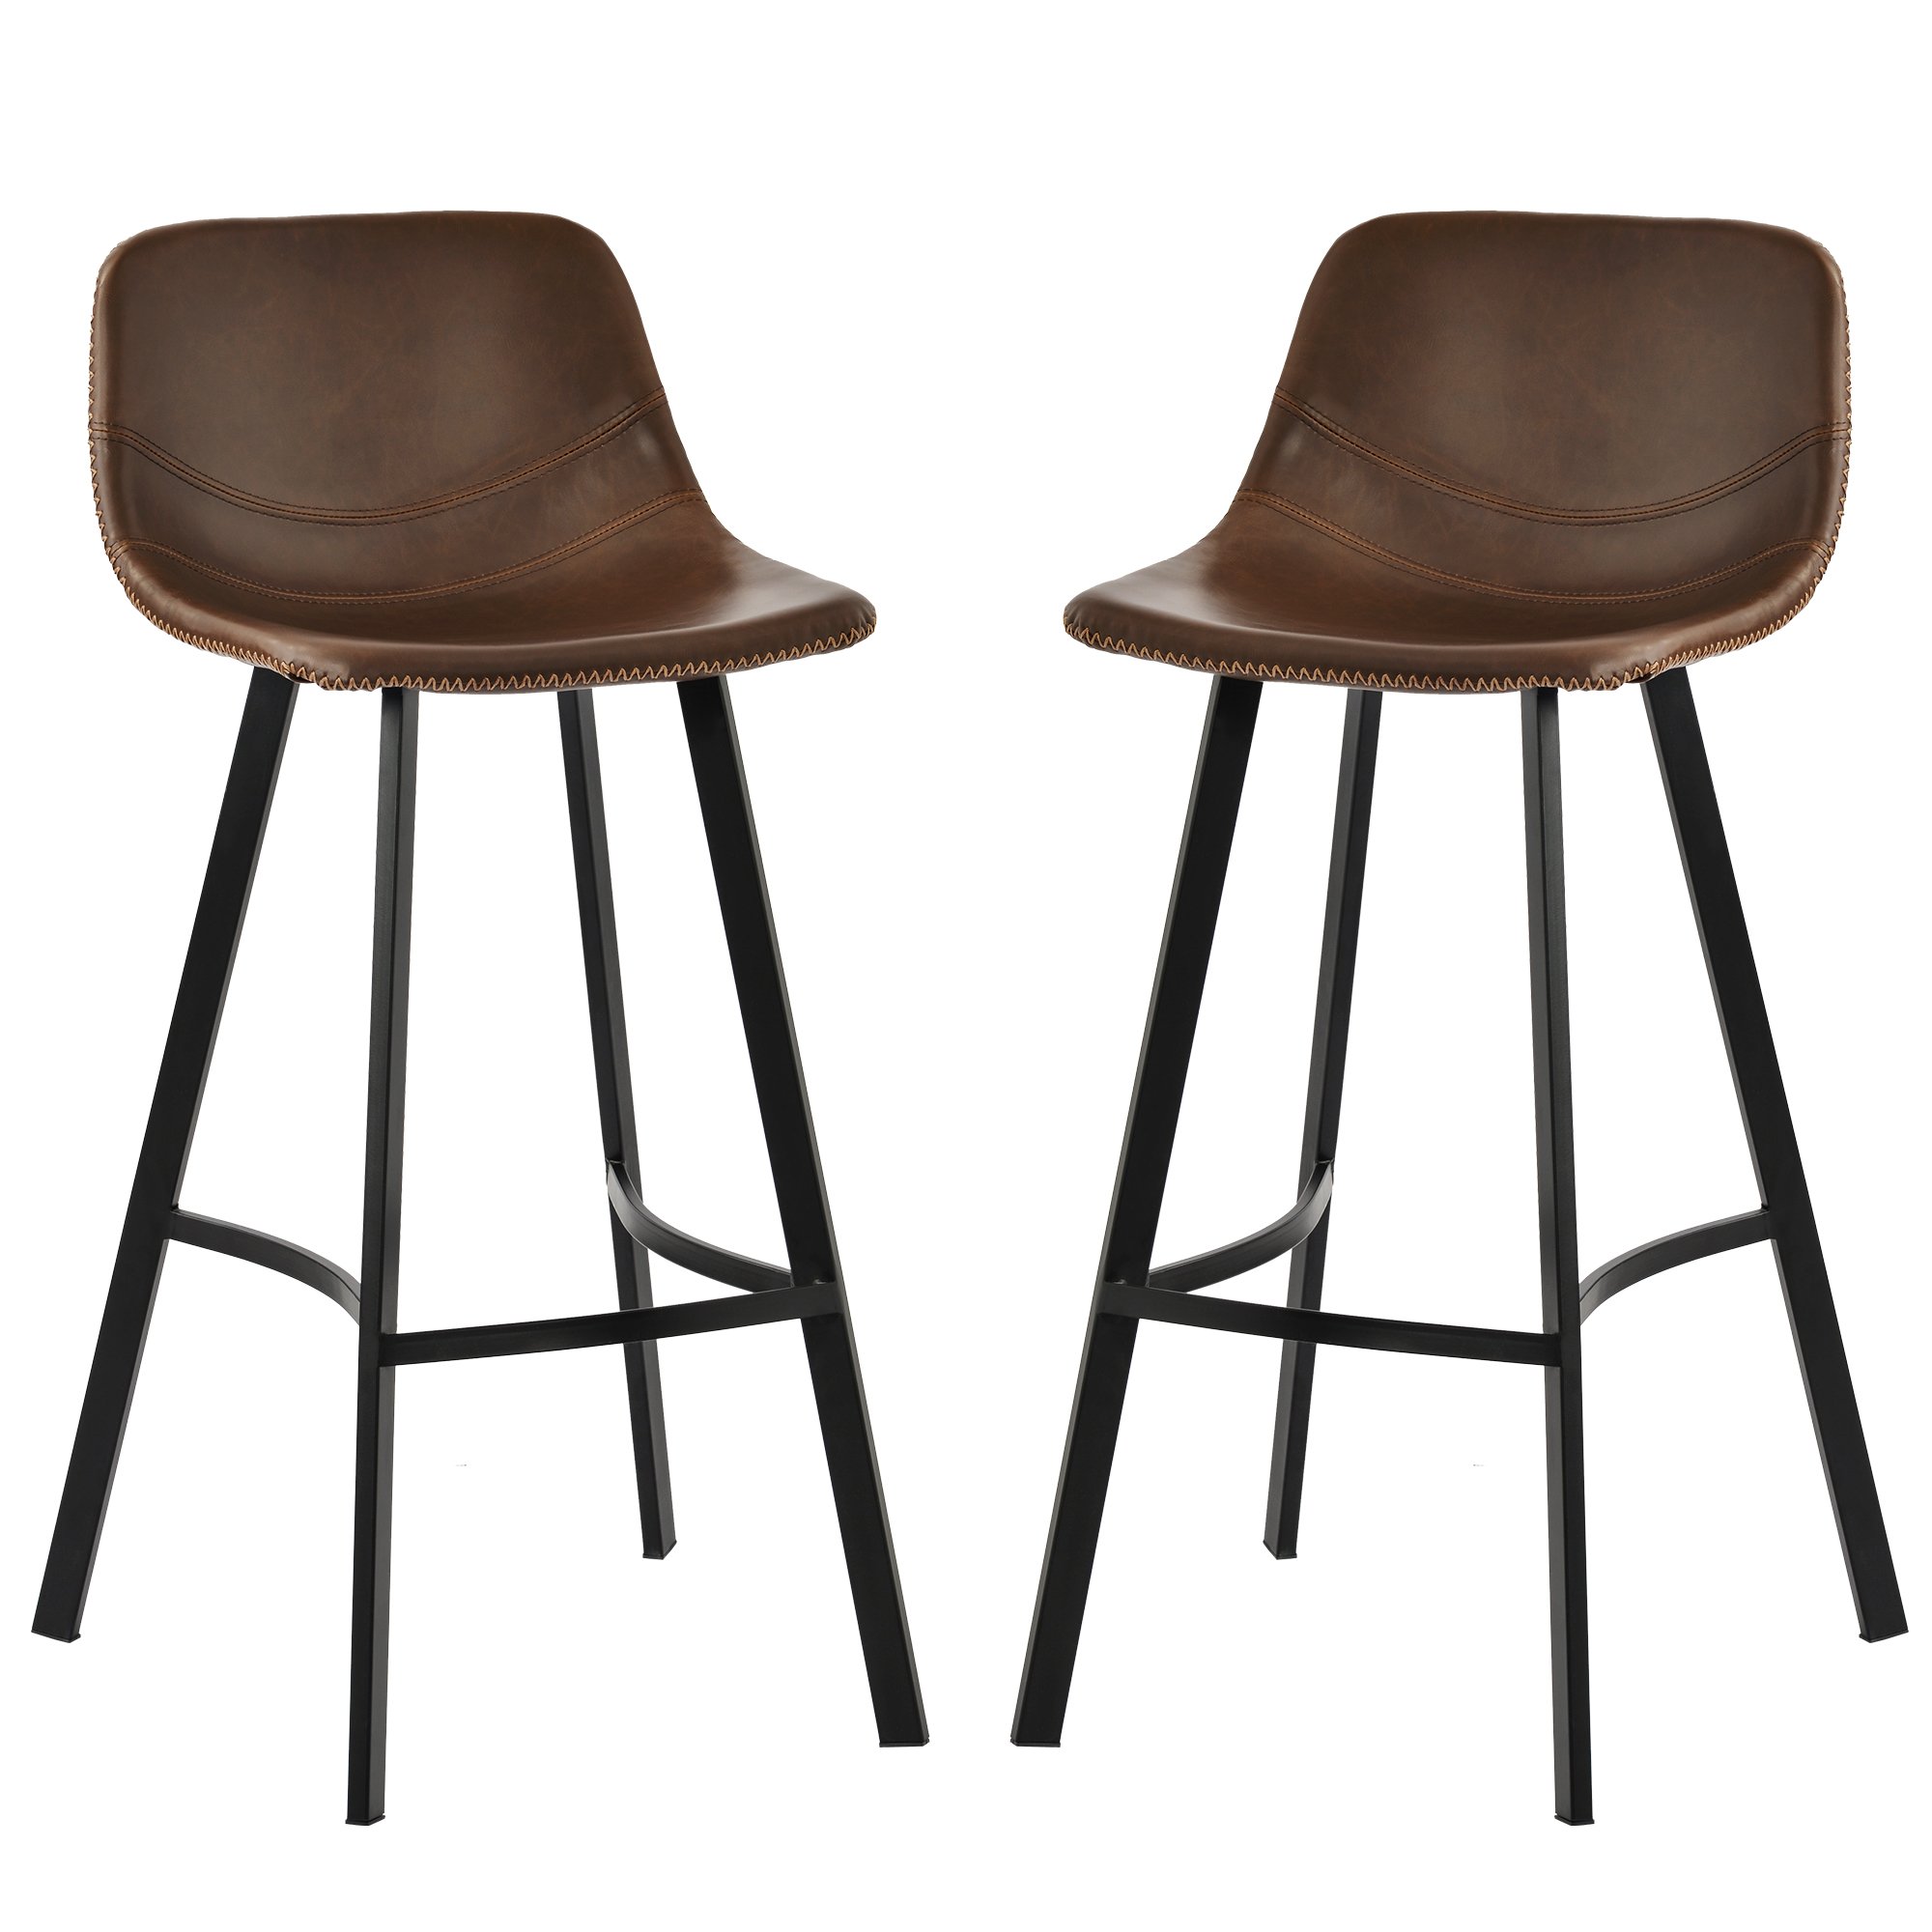 Low Back Footrest Vintage Leatherier Height Bar Stools Dining Chairs Set of 2-CASAINC